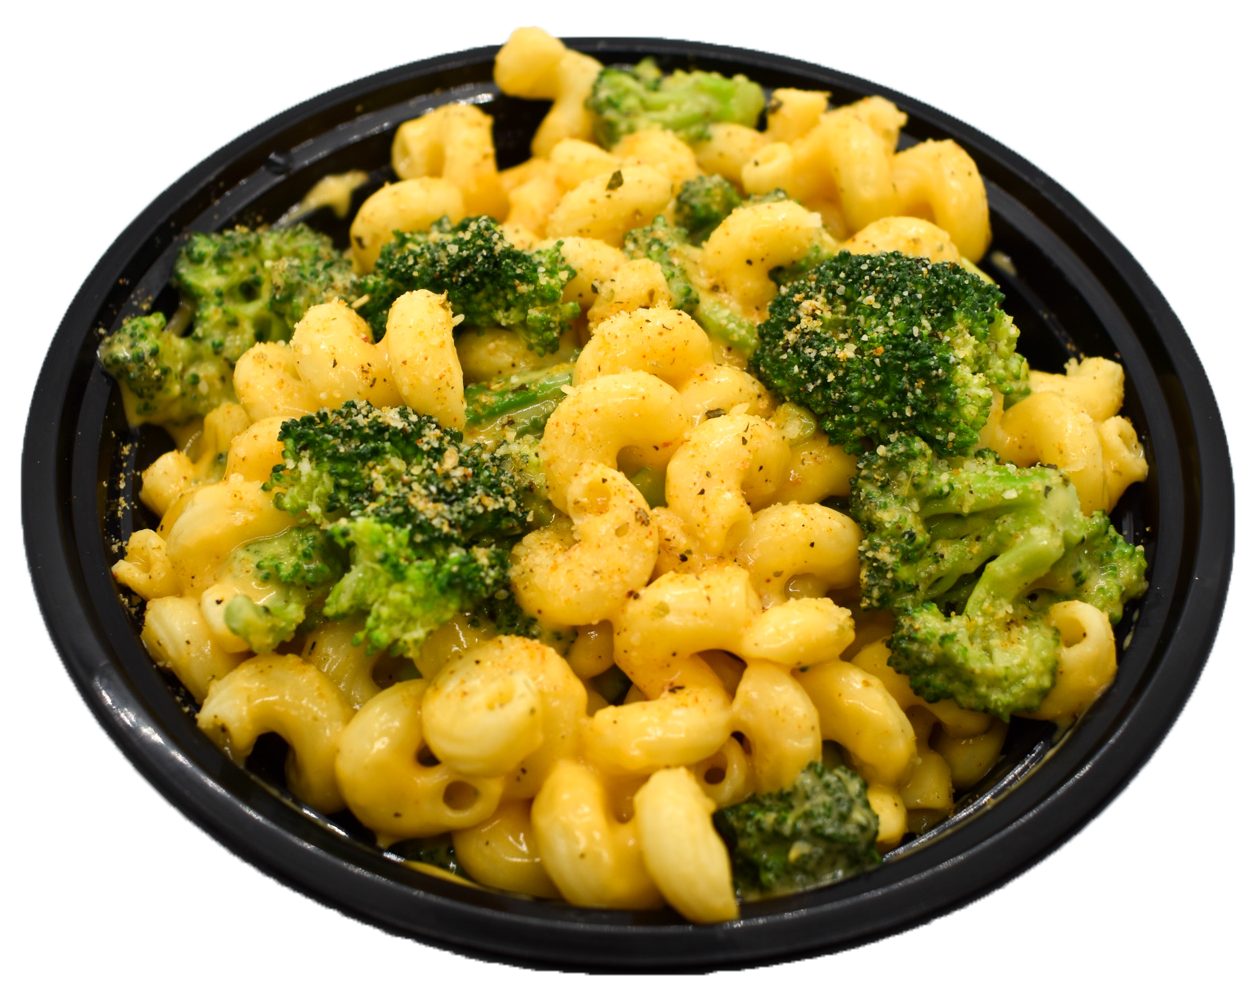 broccoli and cheddar mac and cheese bowl on blank background from the crafty mac